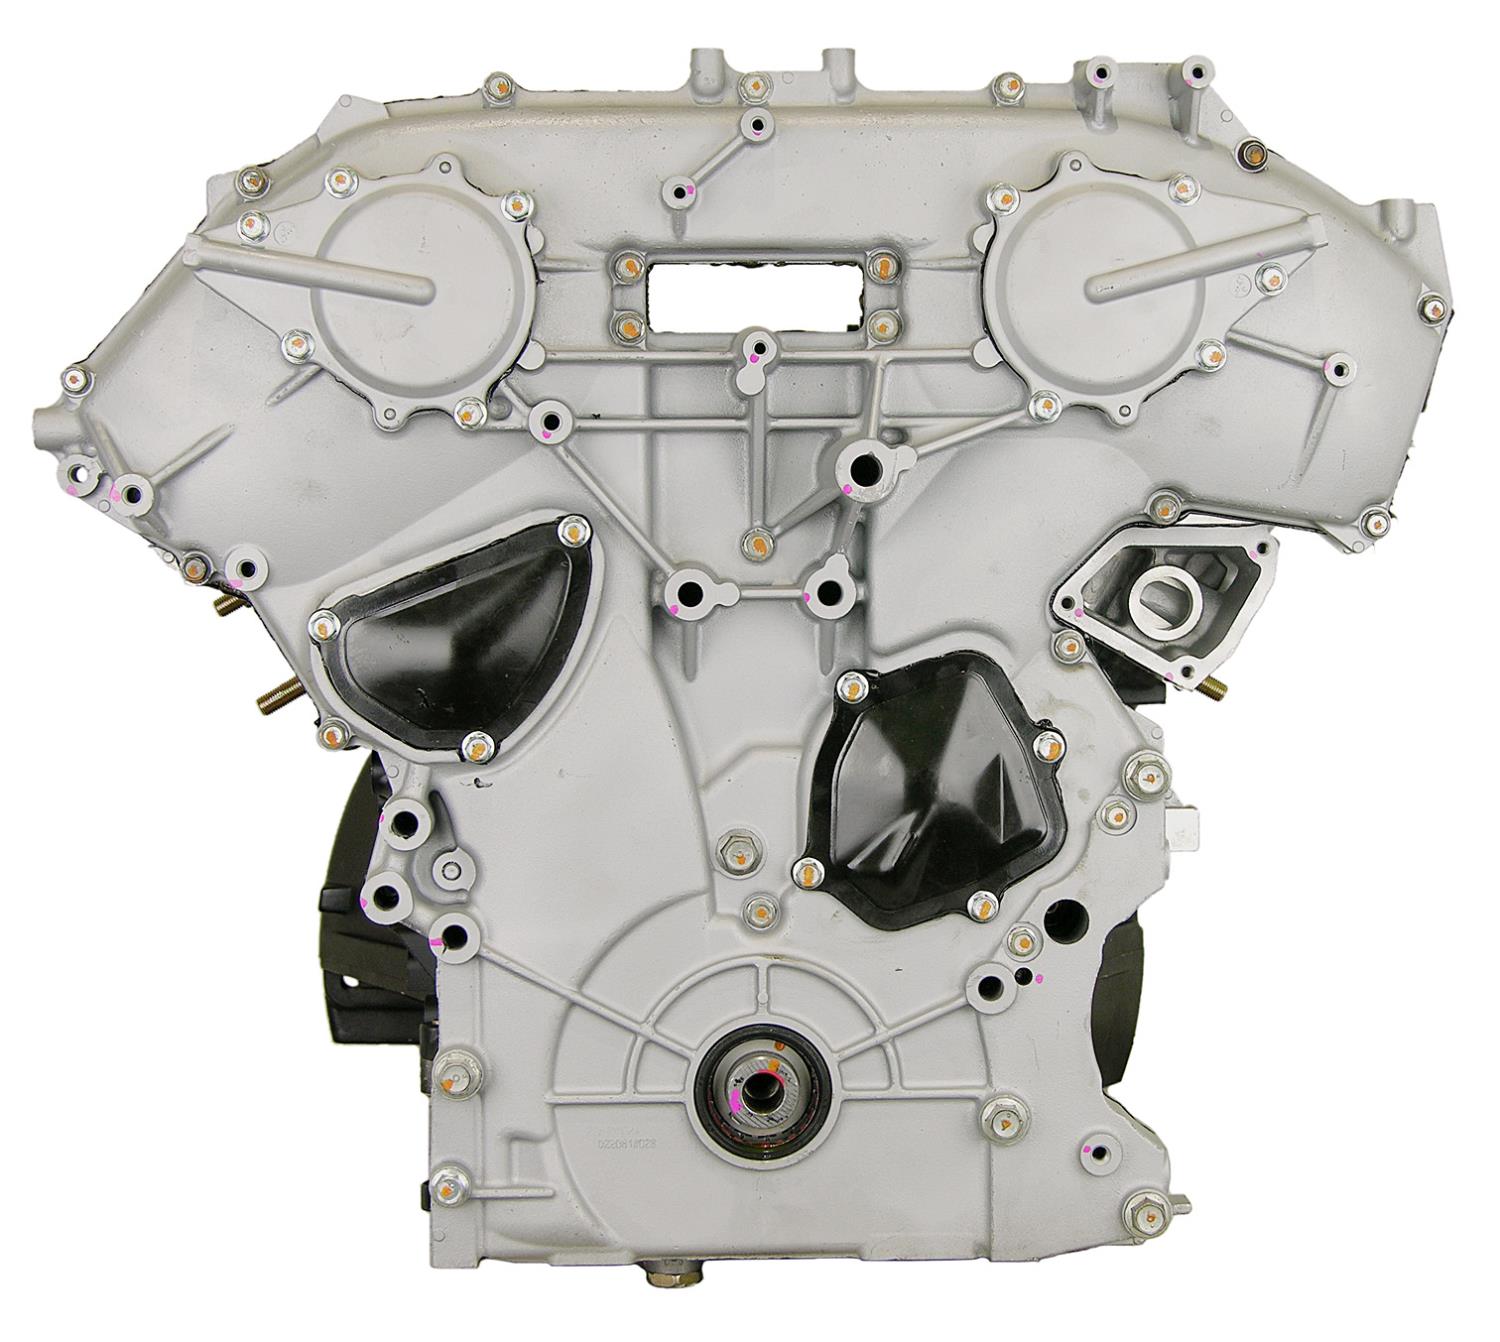 Remanufactured Crate Engine for 2005-2014 Nissan with 4.0L